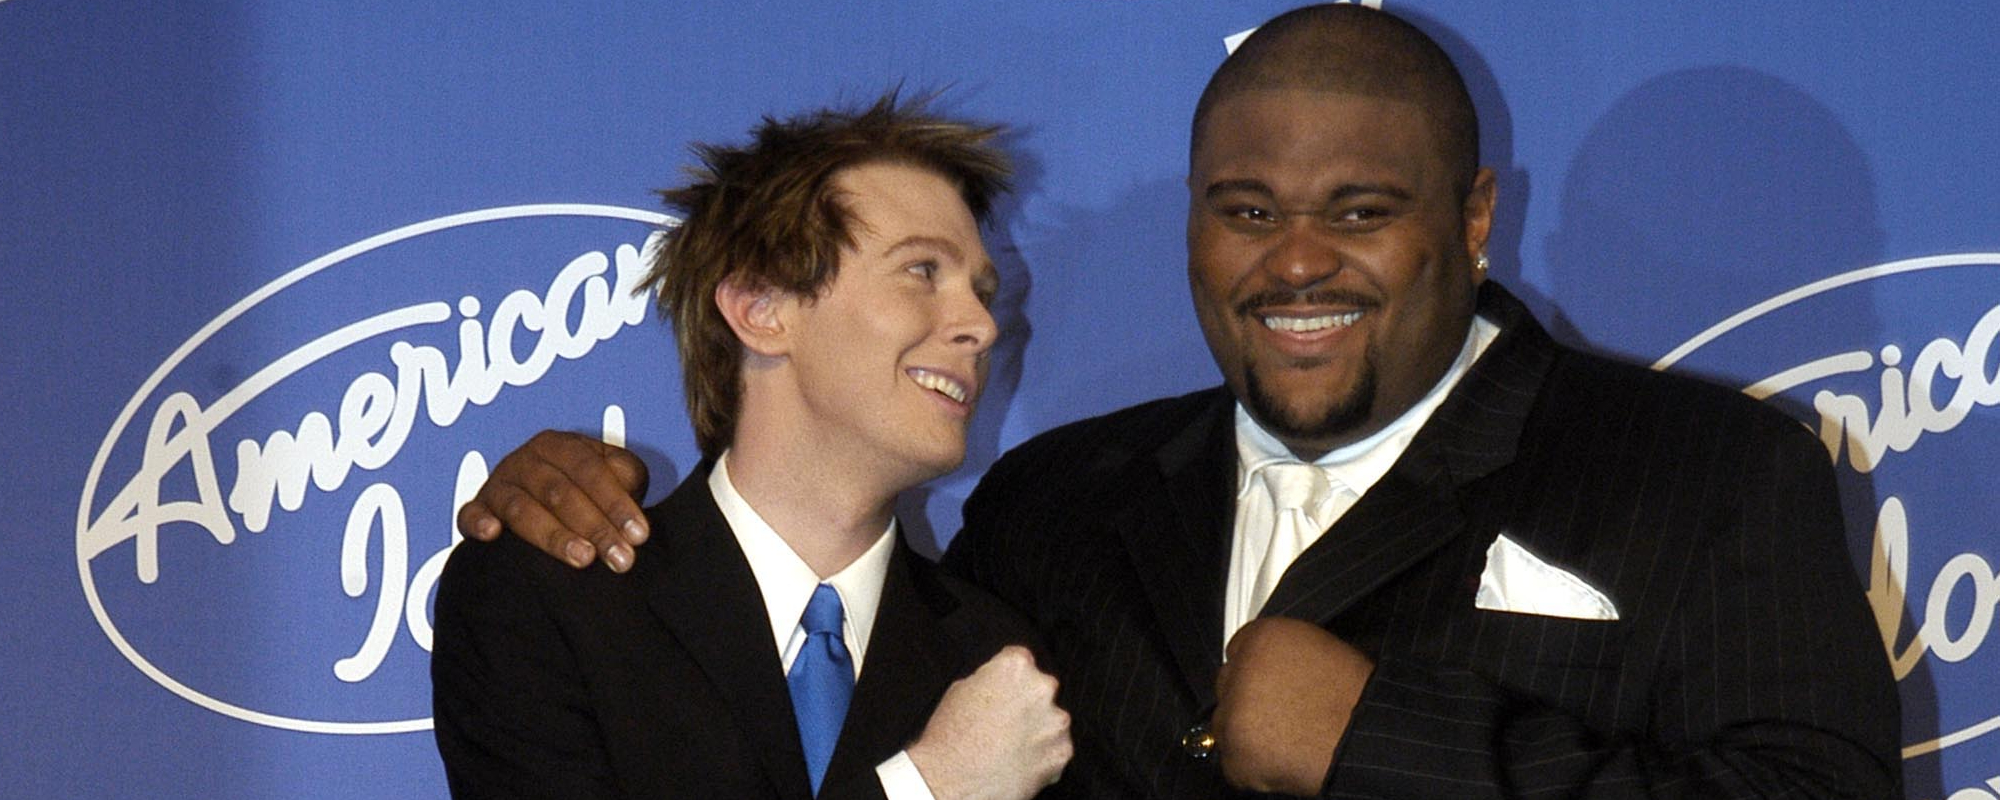 ‘American Idol’ Legends Ruben Studdard and Clay Aiken Make Pitch To Replace Katy Perry, Want to Channel Their Inner Simon Cowell